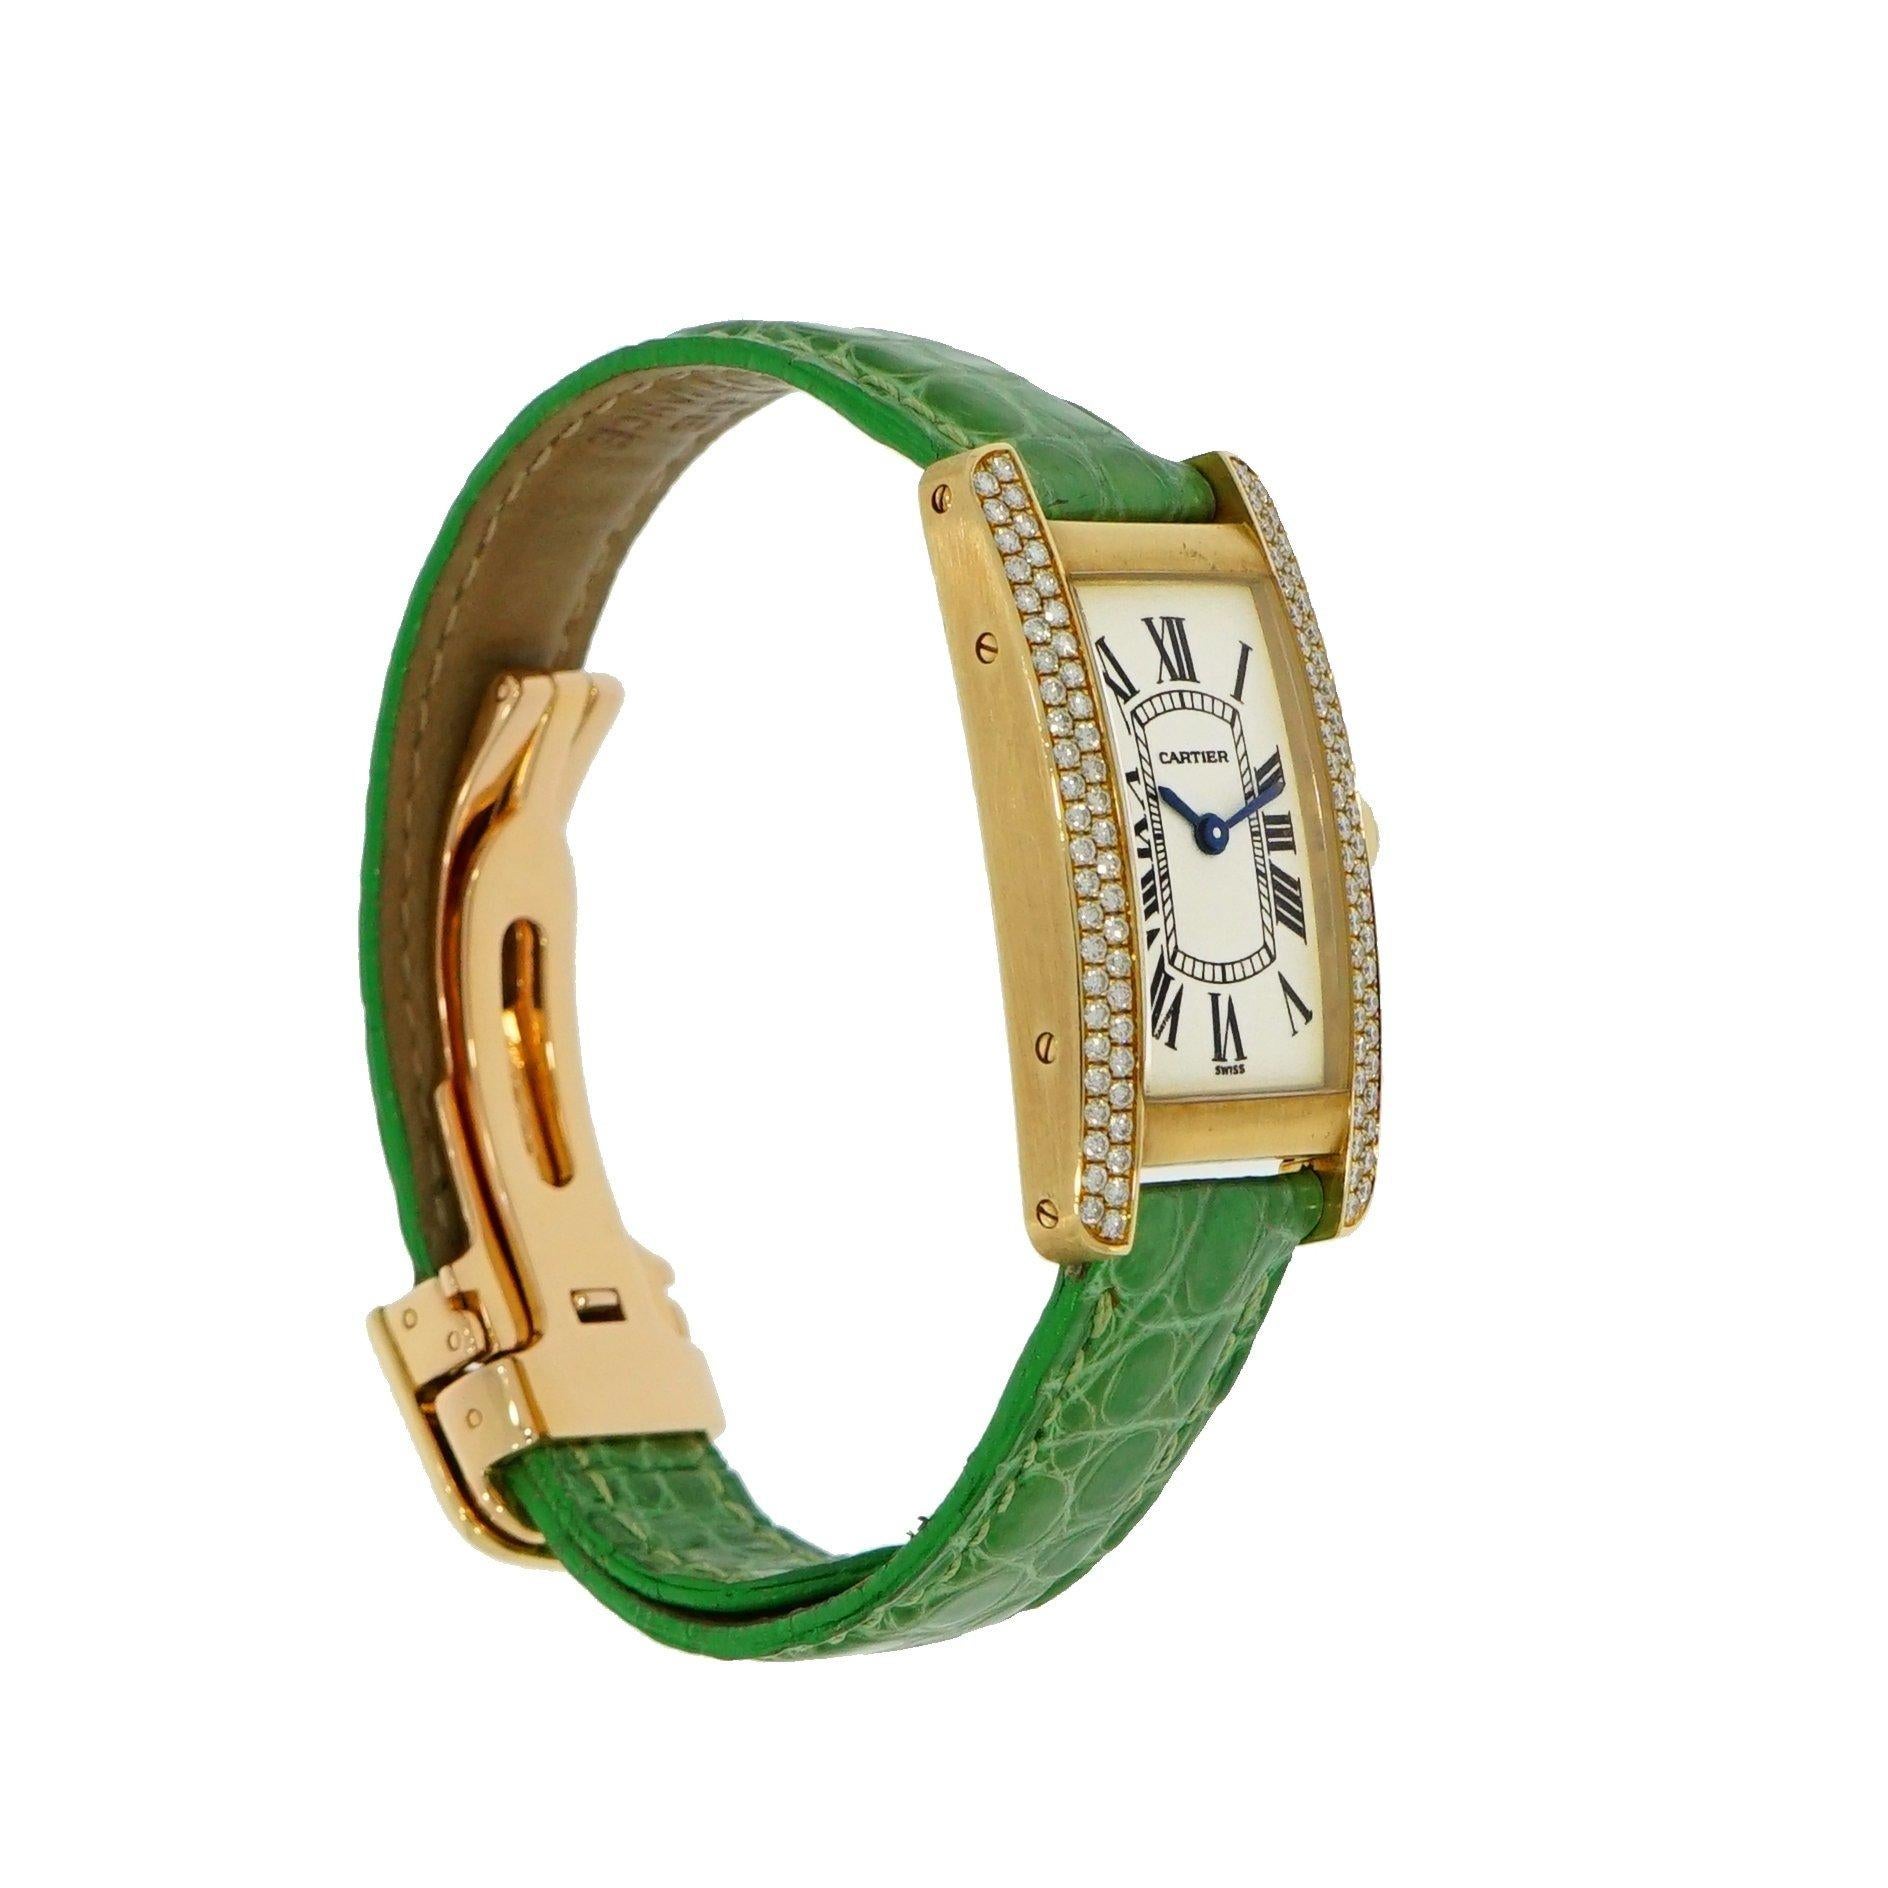 This previously enjoyed Lady’s Cartier American Tank (small) is crafted in 18 karat yellow gold case and features a quartz movement, silvered guilloche dial with black roman numerals, blue sword shaped hour hands and a beautiful diamond bezel, set